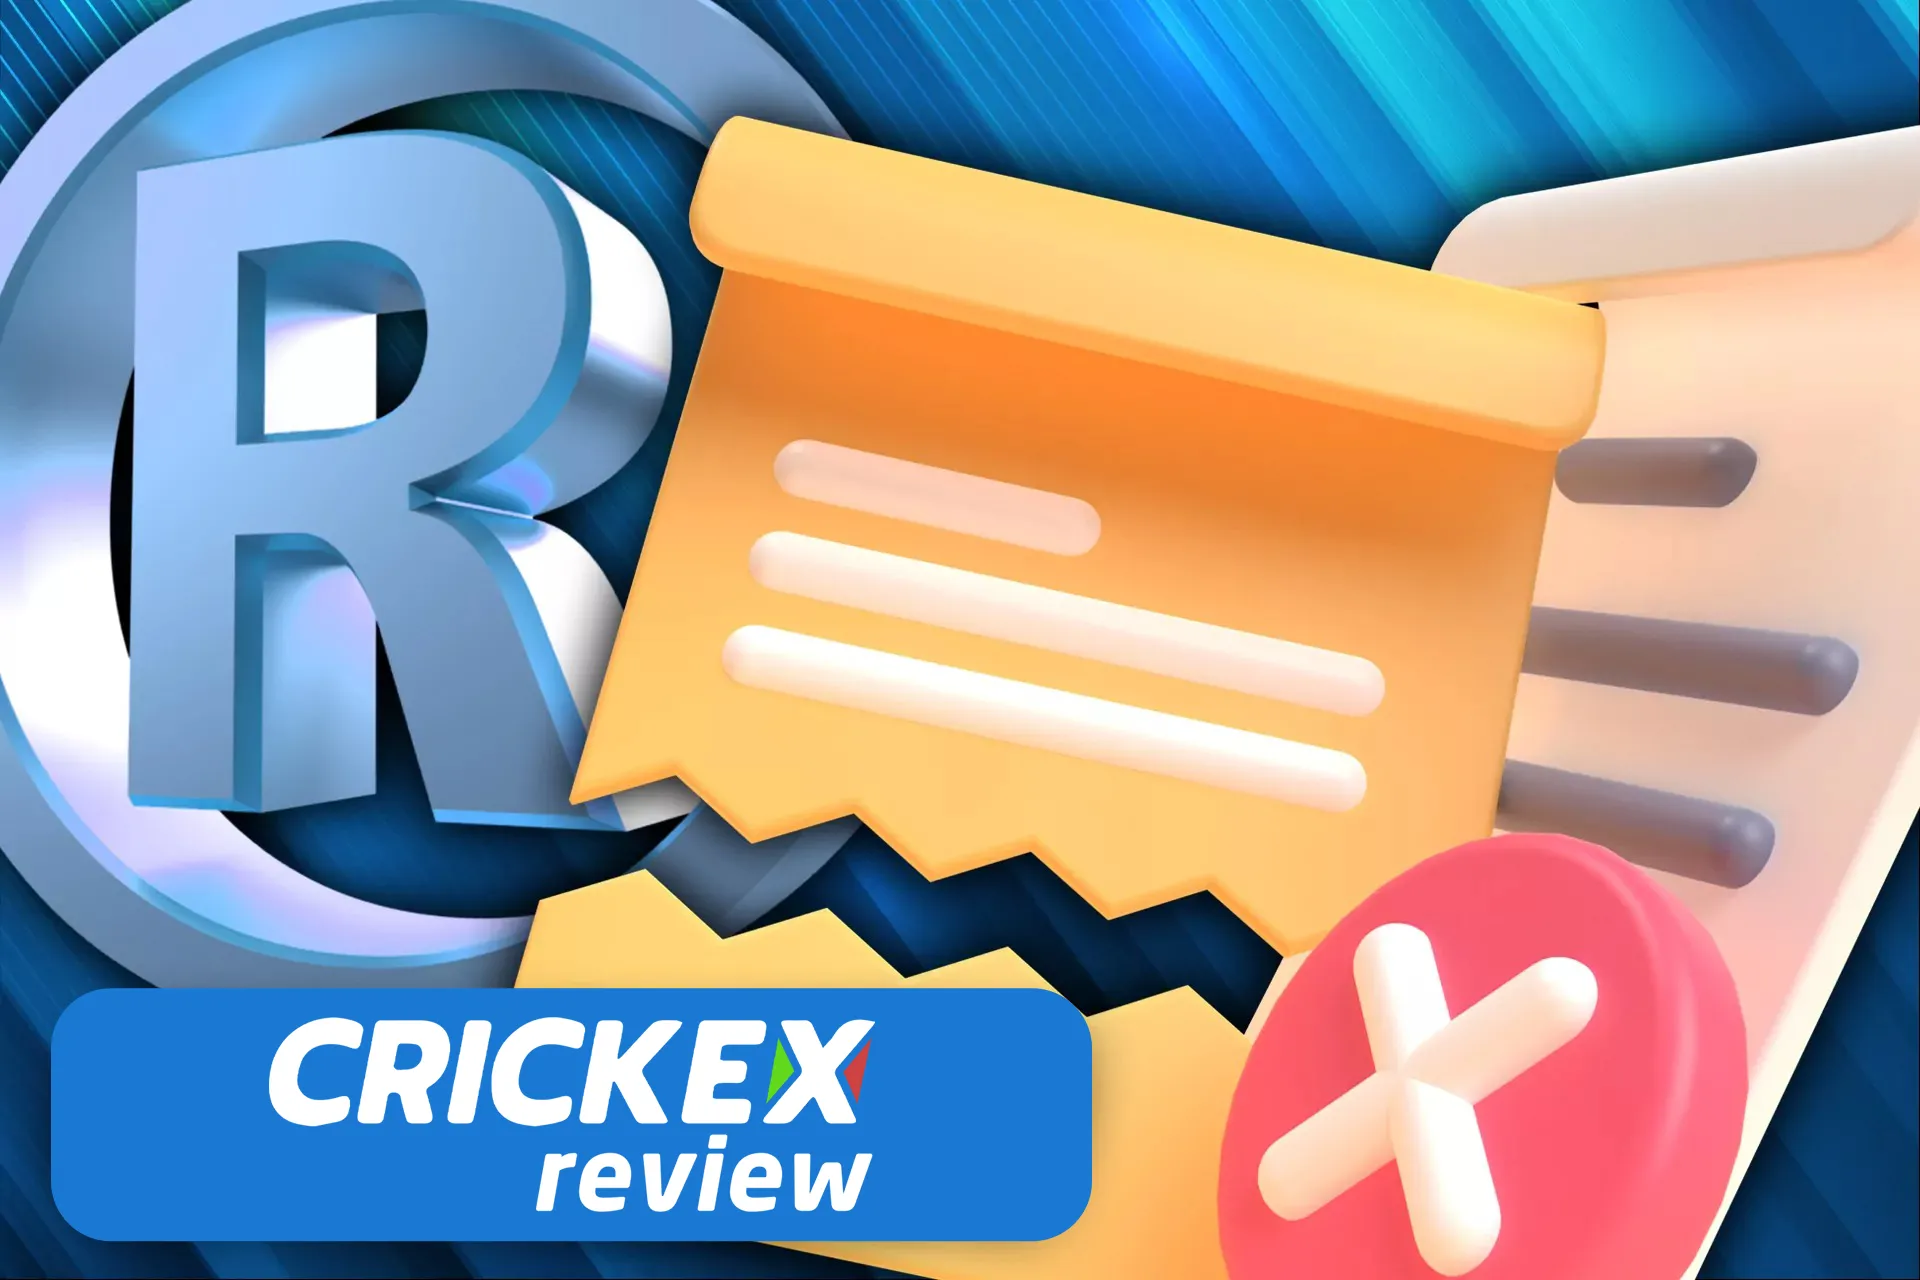 The Curacao Commission does not own the Crickex brand.